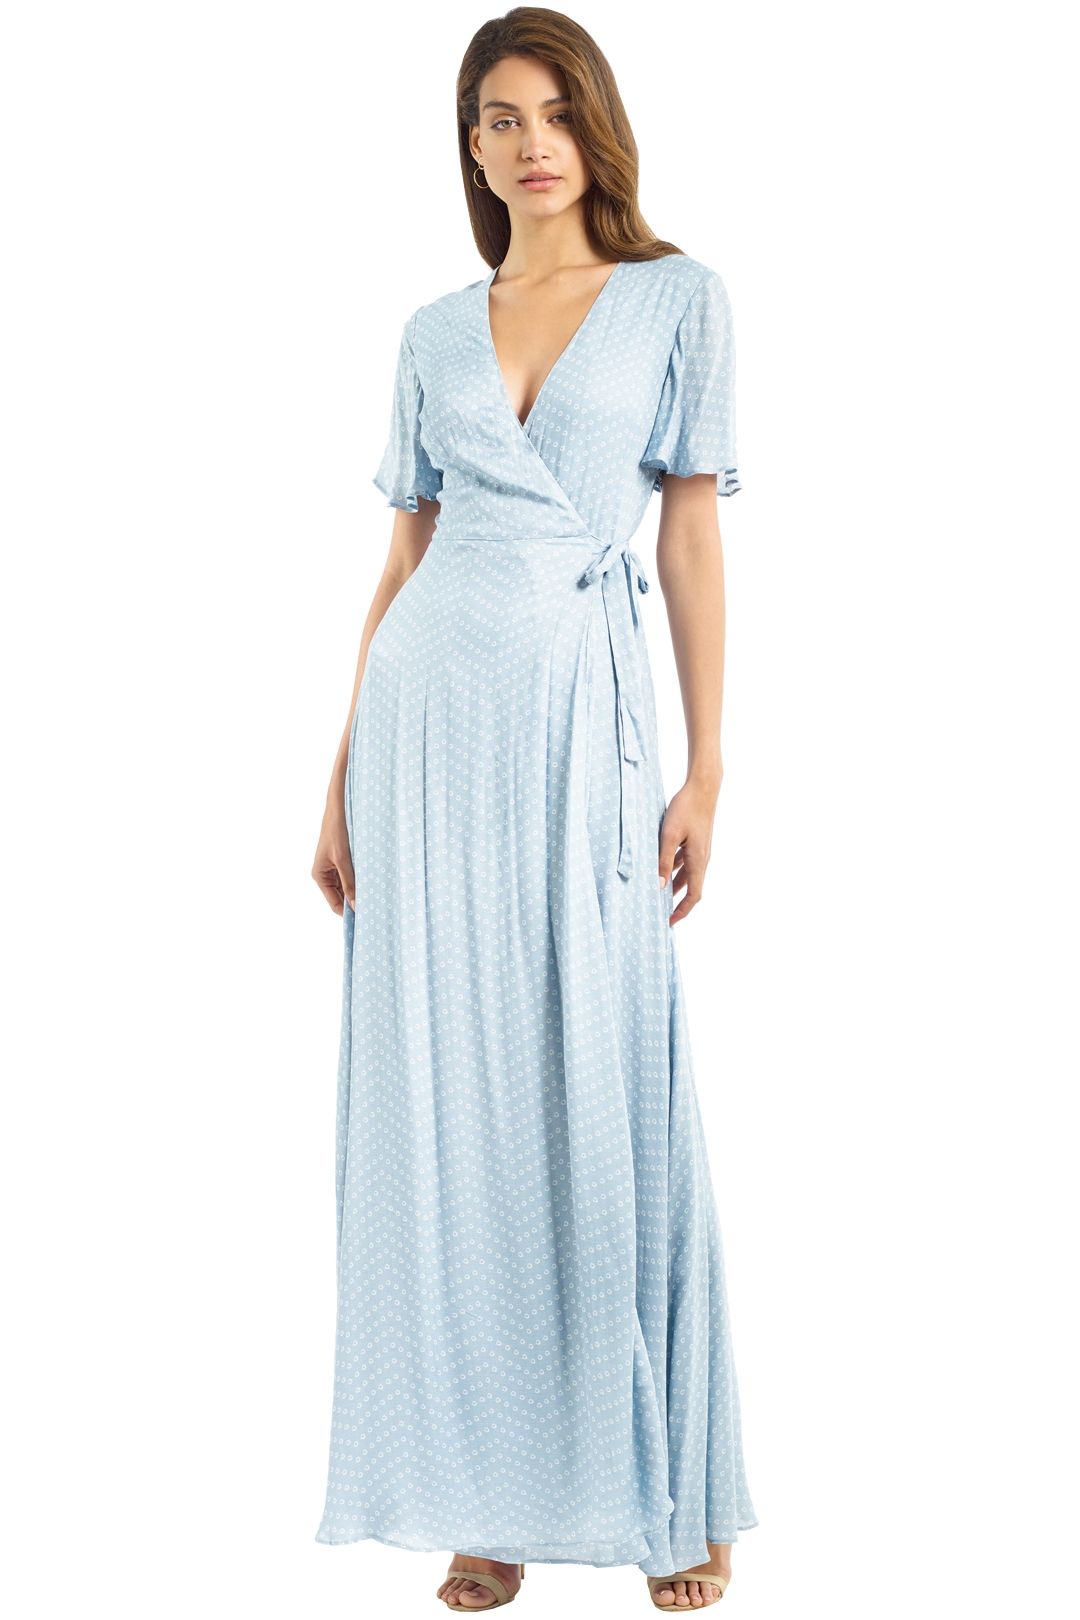 The Jetset Diaries - Mohea Maxi Wrap Dress - Sterling Blue - Front